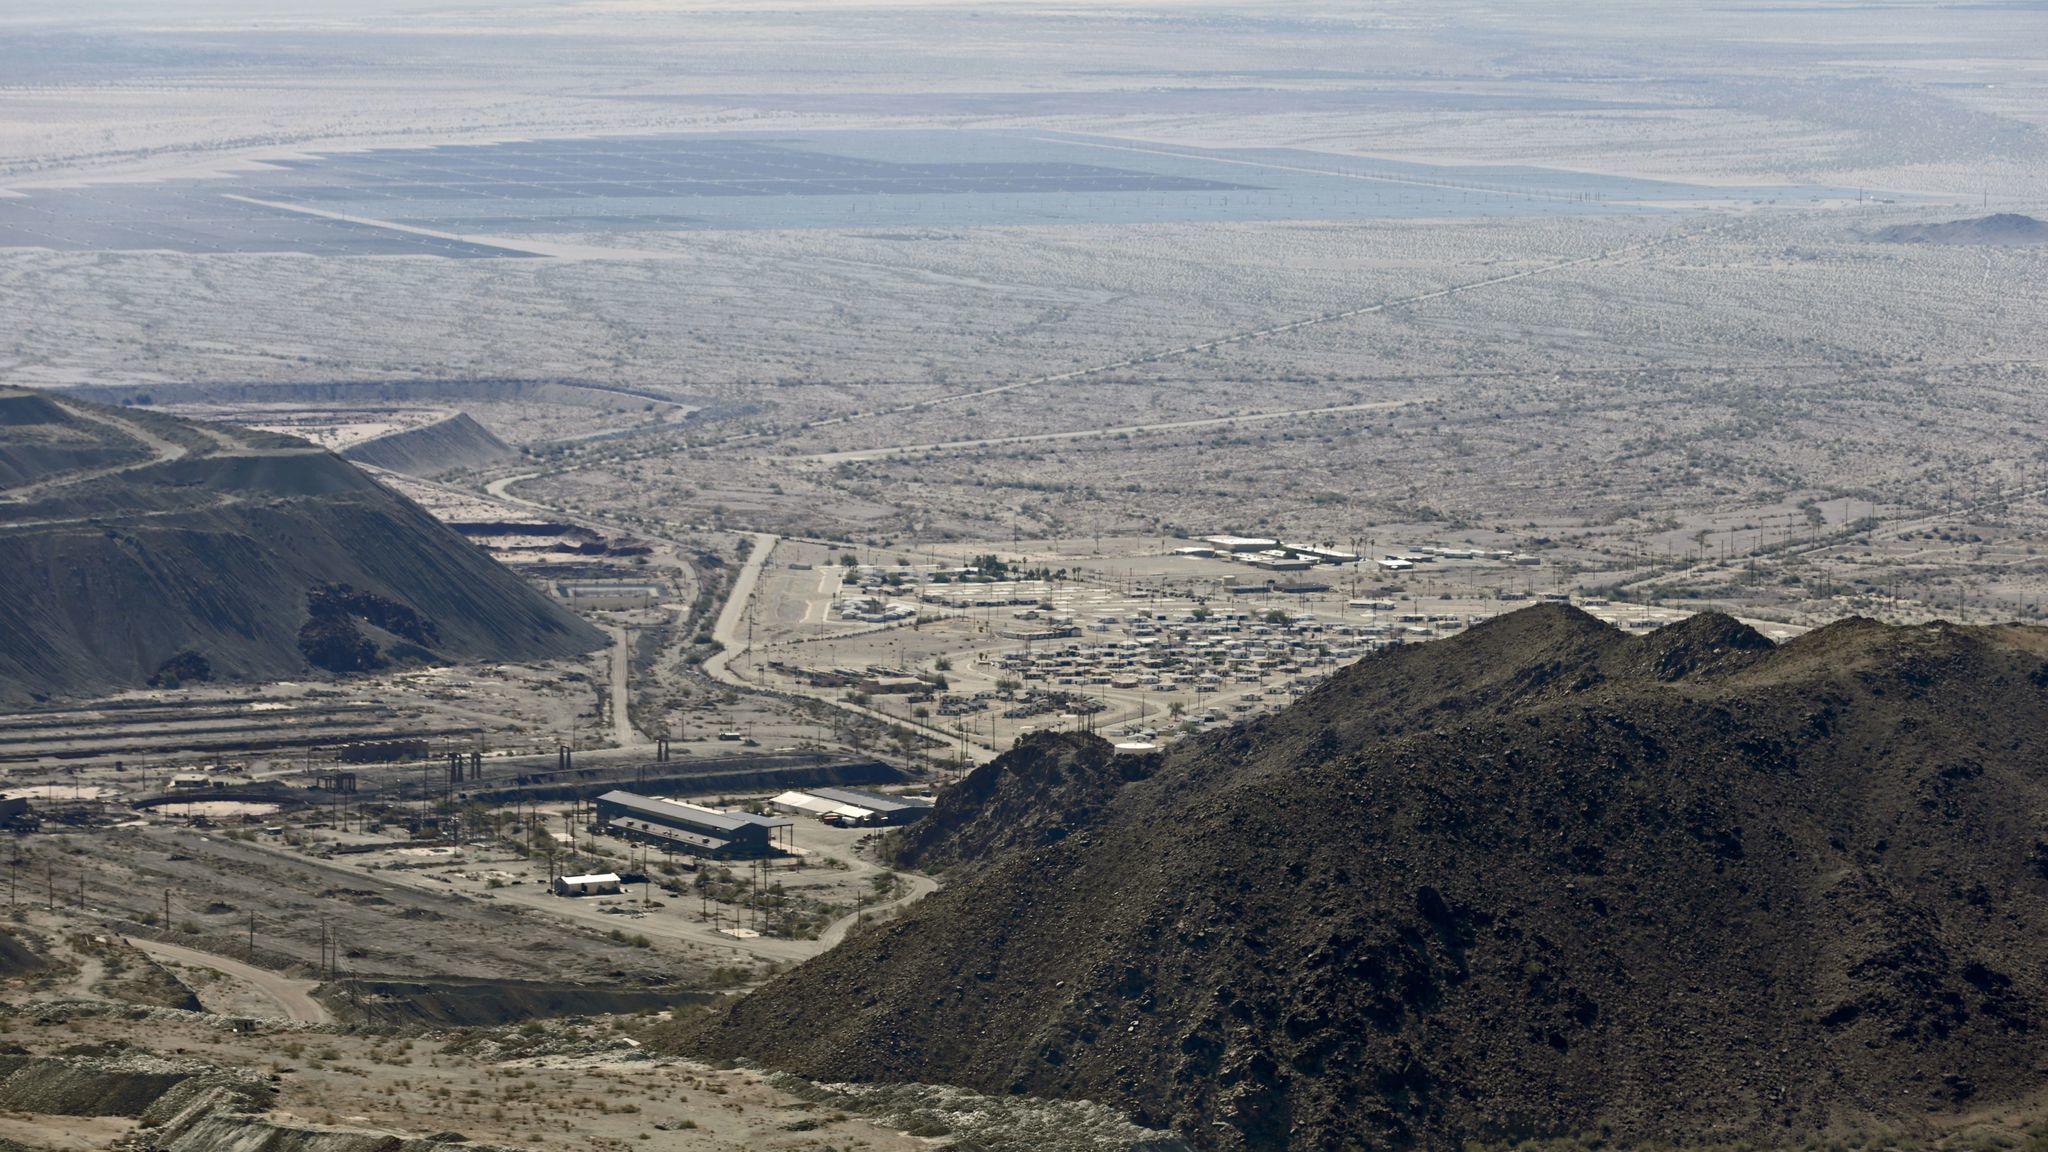 A view of the lower portion of the Eagle Mountain mine site and abandoned company town. A large solar farm is in the distance.